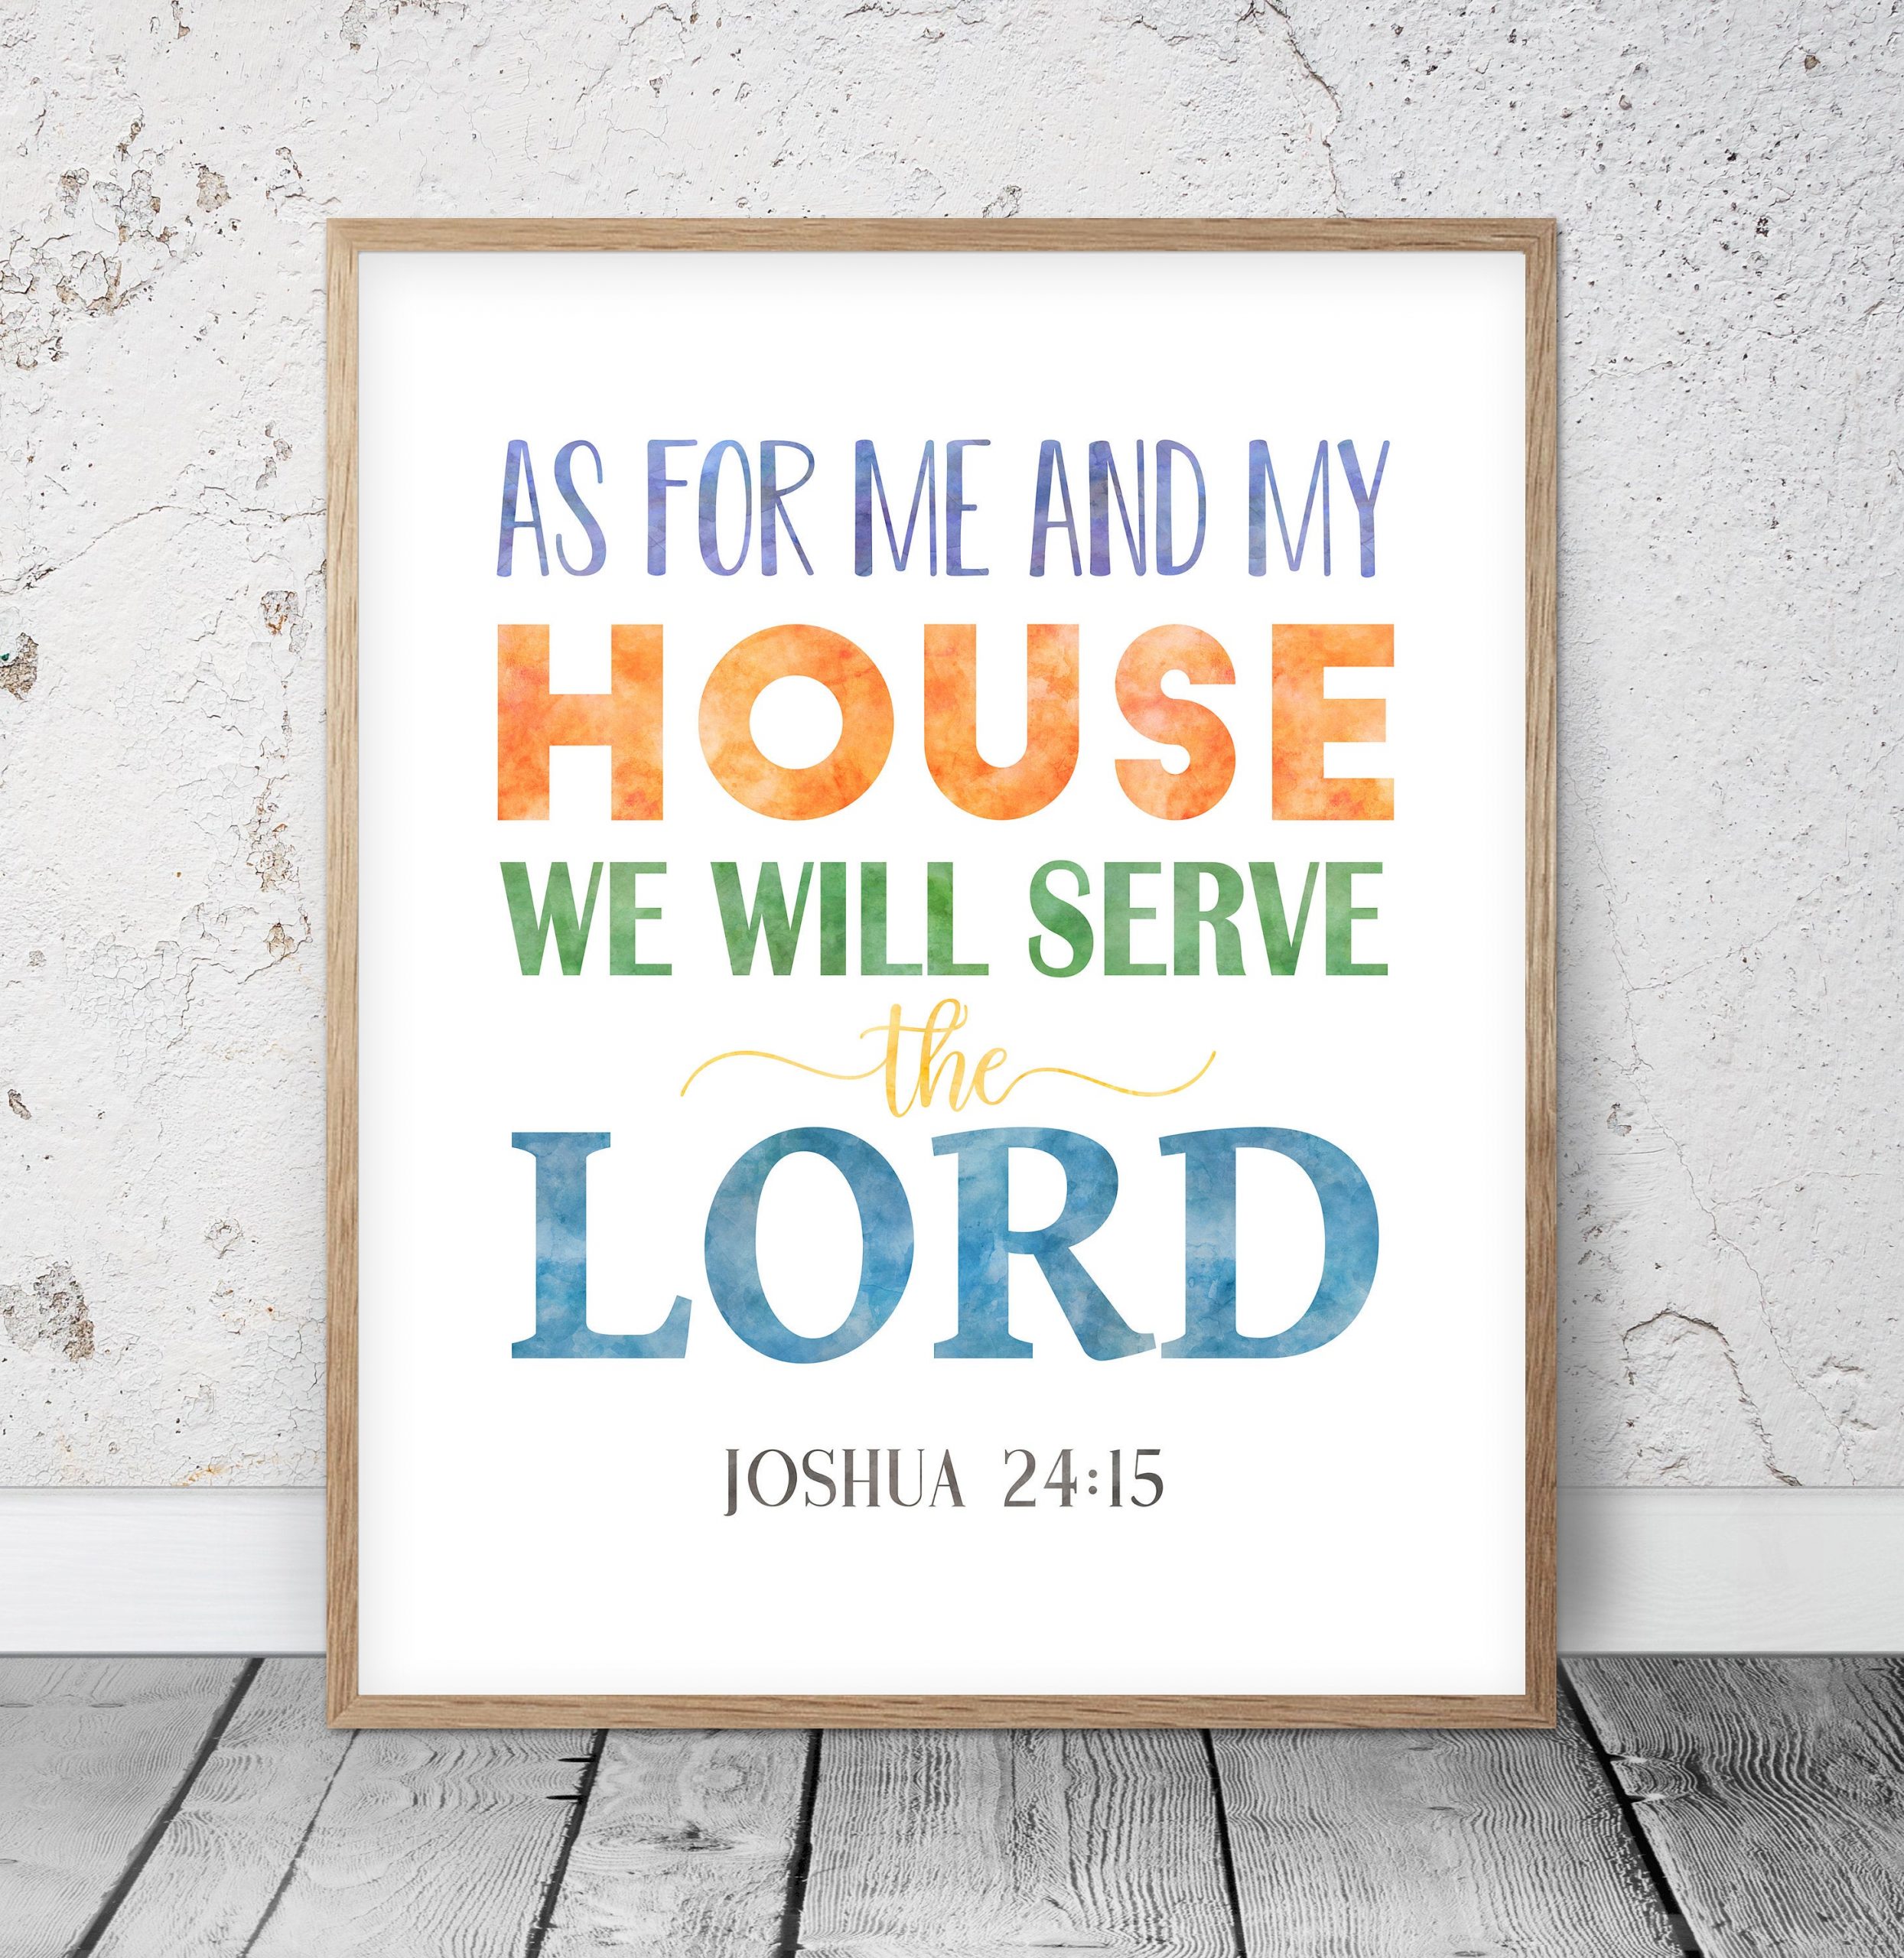 As For Me And My House We Will Serve The Lord, Joshua 24:15, Printable Bible Verse, Nursery Decor